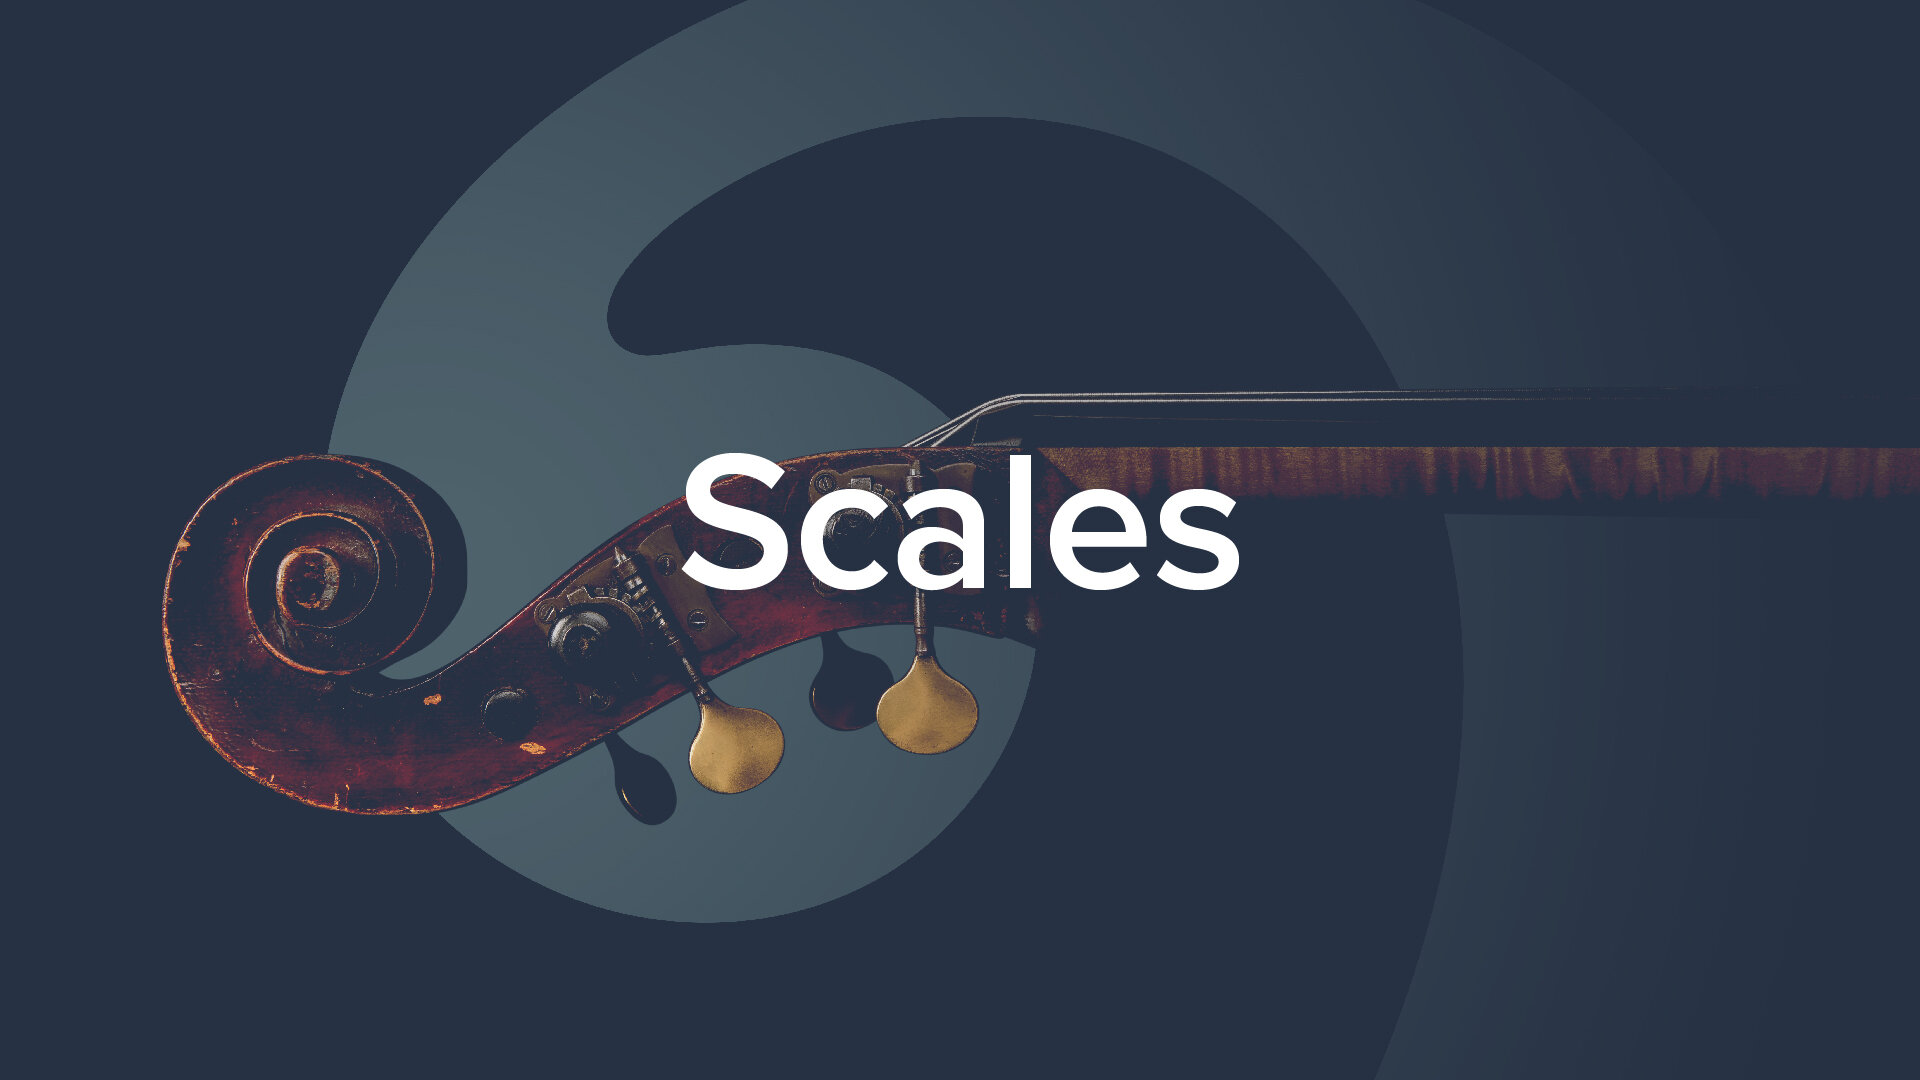 Double Bass Scales: The Play-Along Collection